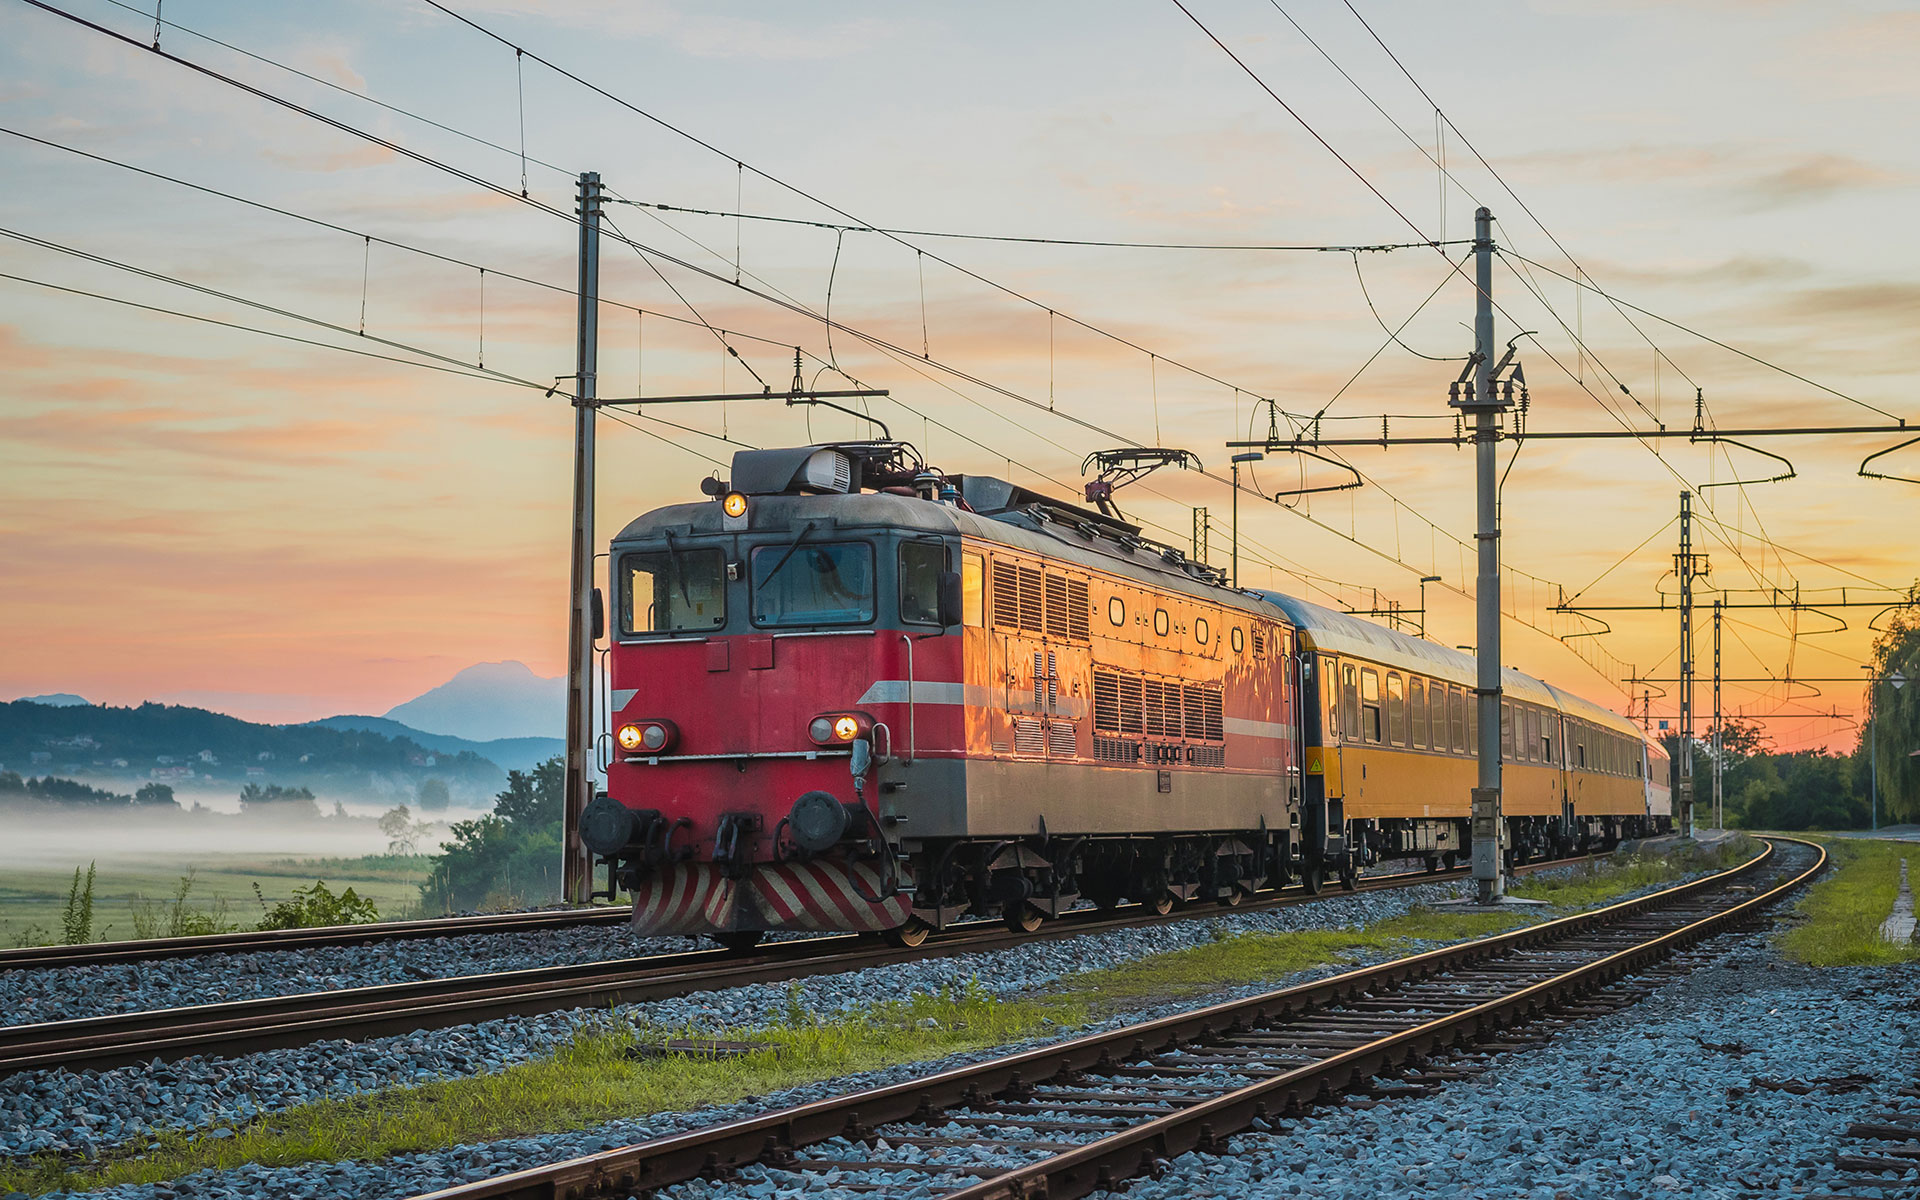 While many night train services are still on hold, the RegioJet overnight train from Prague to Rijeka, which is now running daily in both directions, is an entirely new route (photo © Anze Furlan / dreamstime.com).